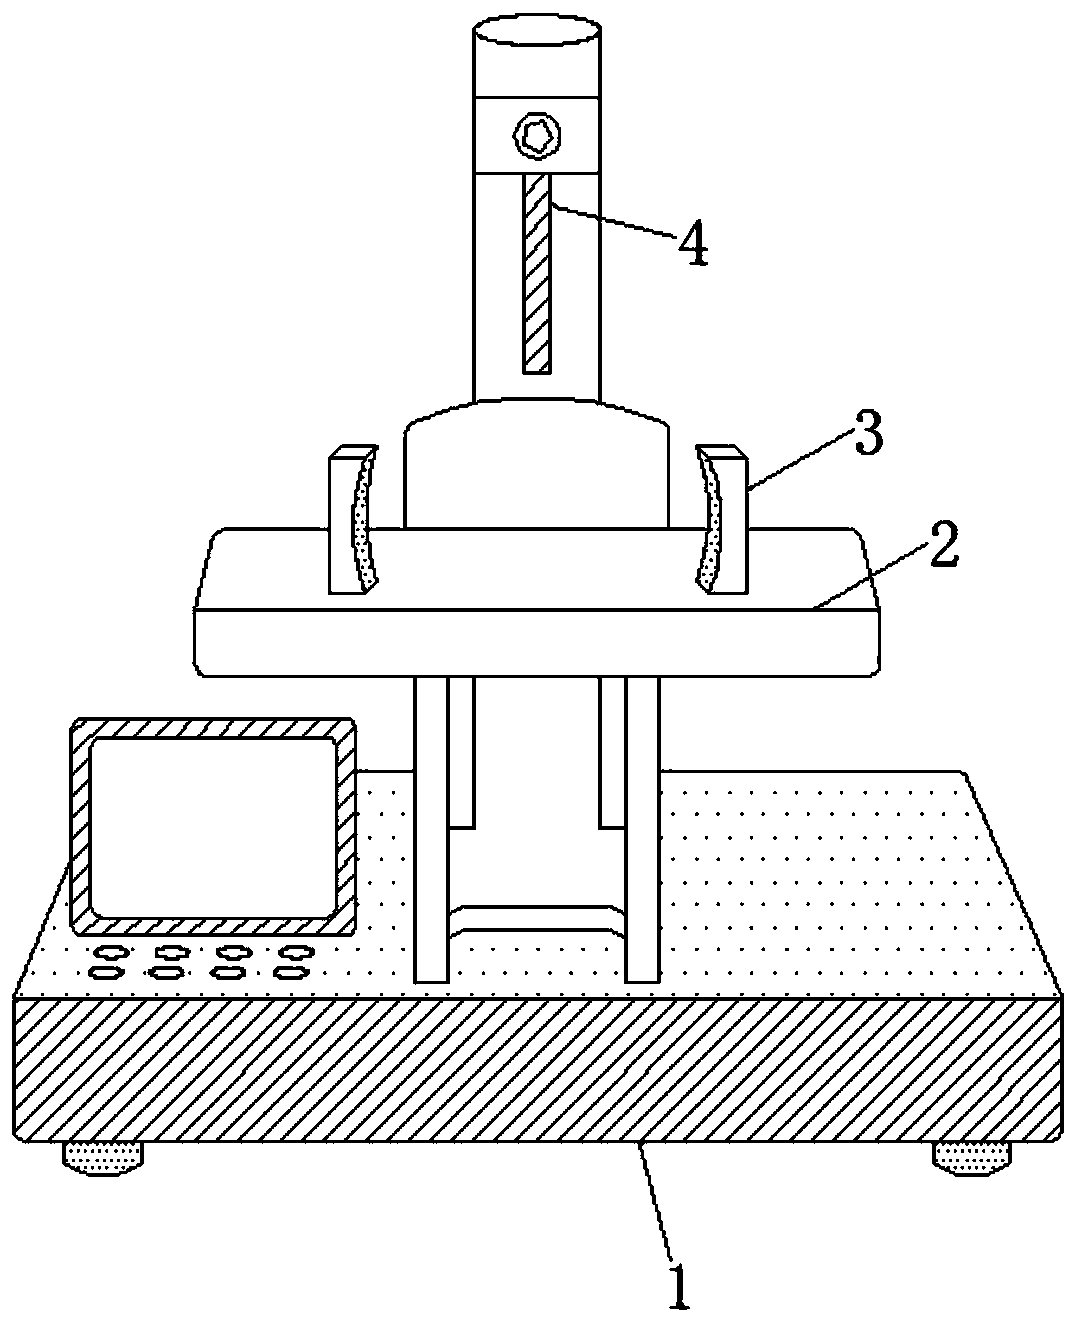 Clamped piston perforating device capable of guaranteeing drilling stability based on reciprocating movement